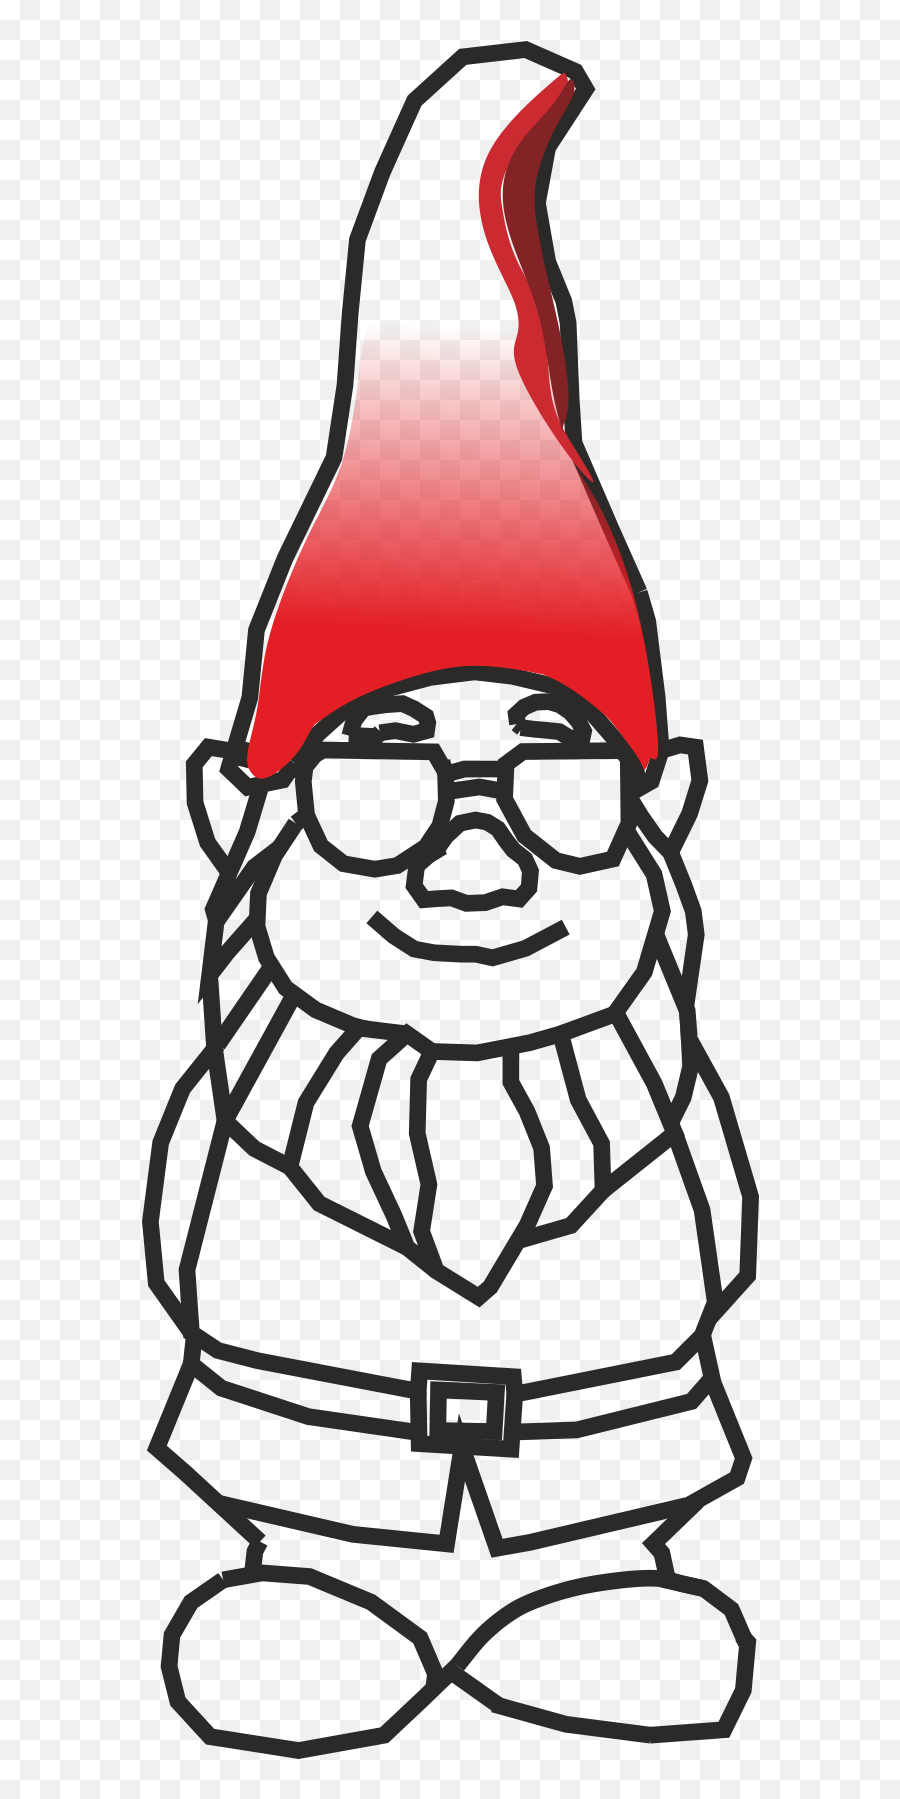 Heinzelmann 535 New Features To Improve Usability In Emoji,Gnome Clipart Black And White